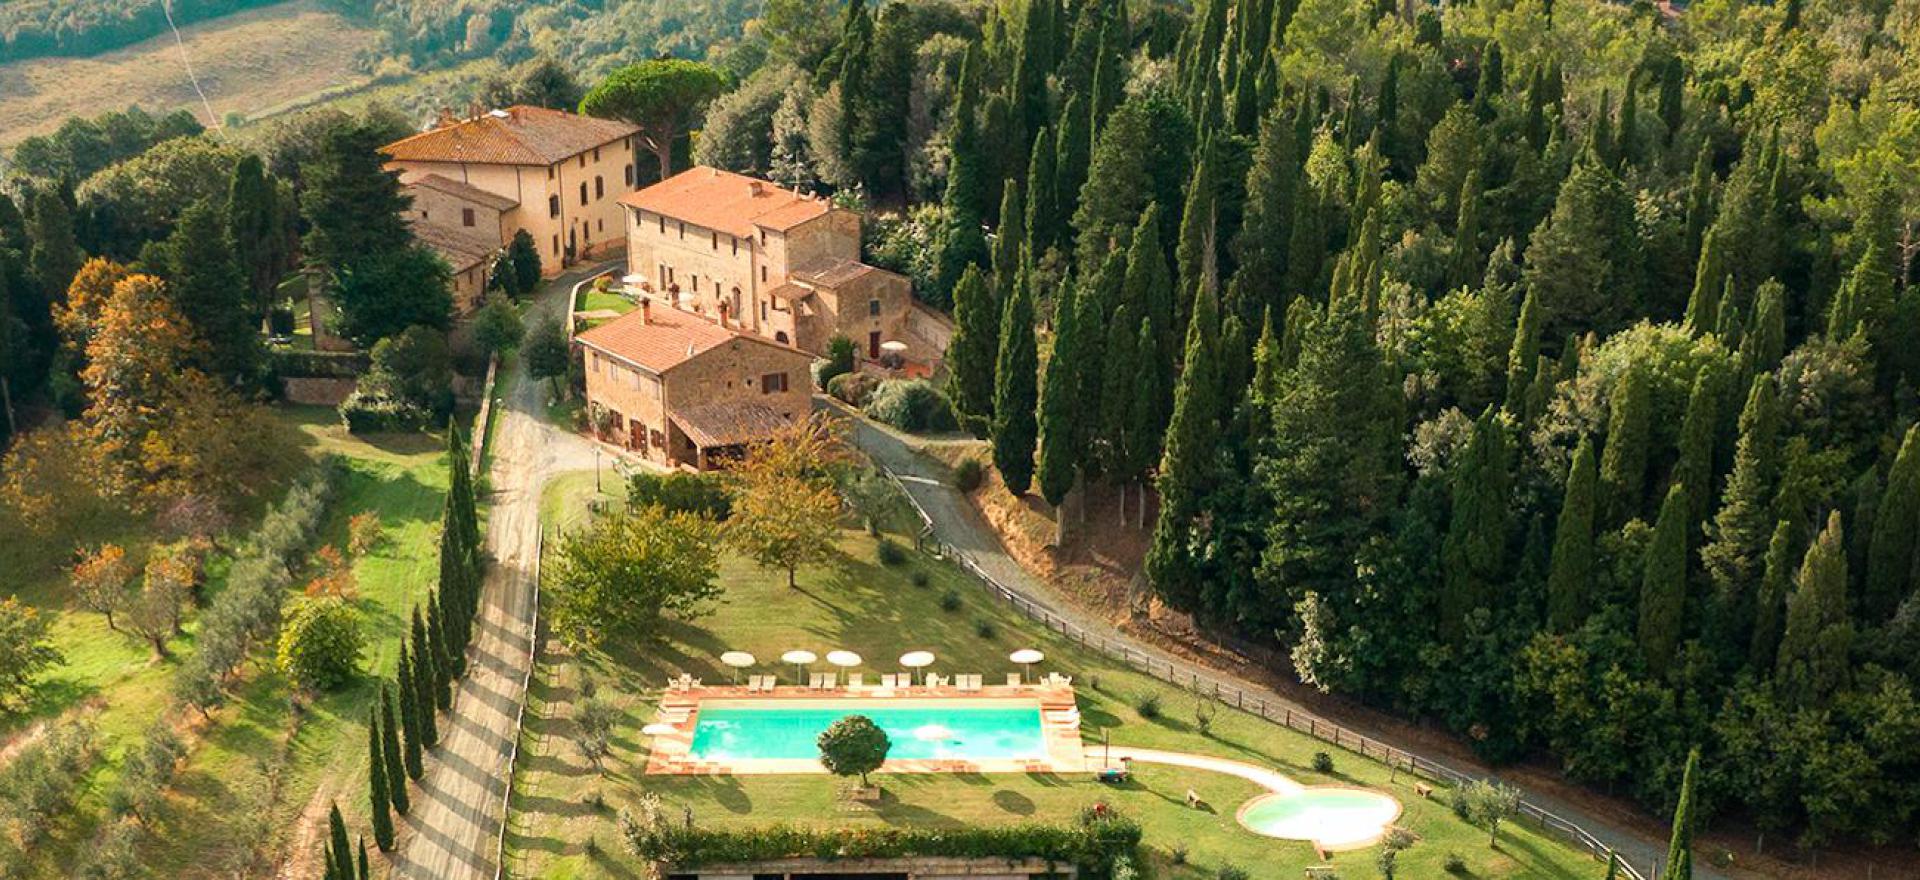 Agriturismo Tuscany Family-friendly agriturismo centrally located in Tuscany